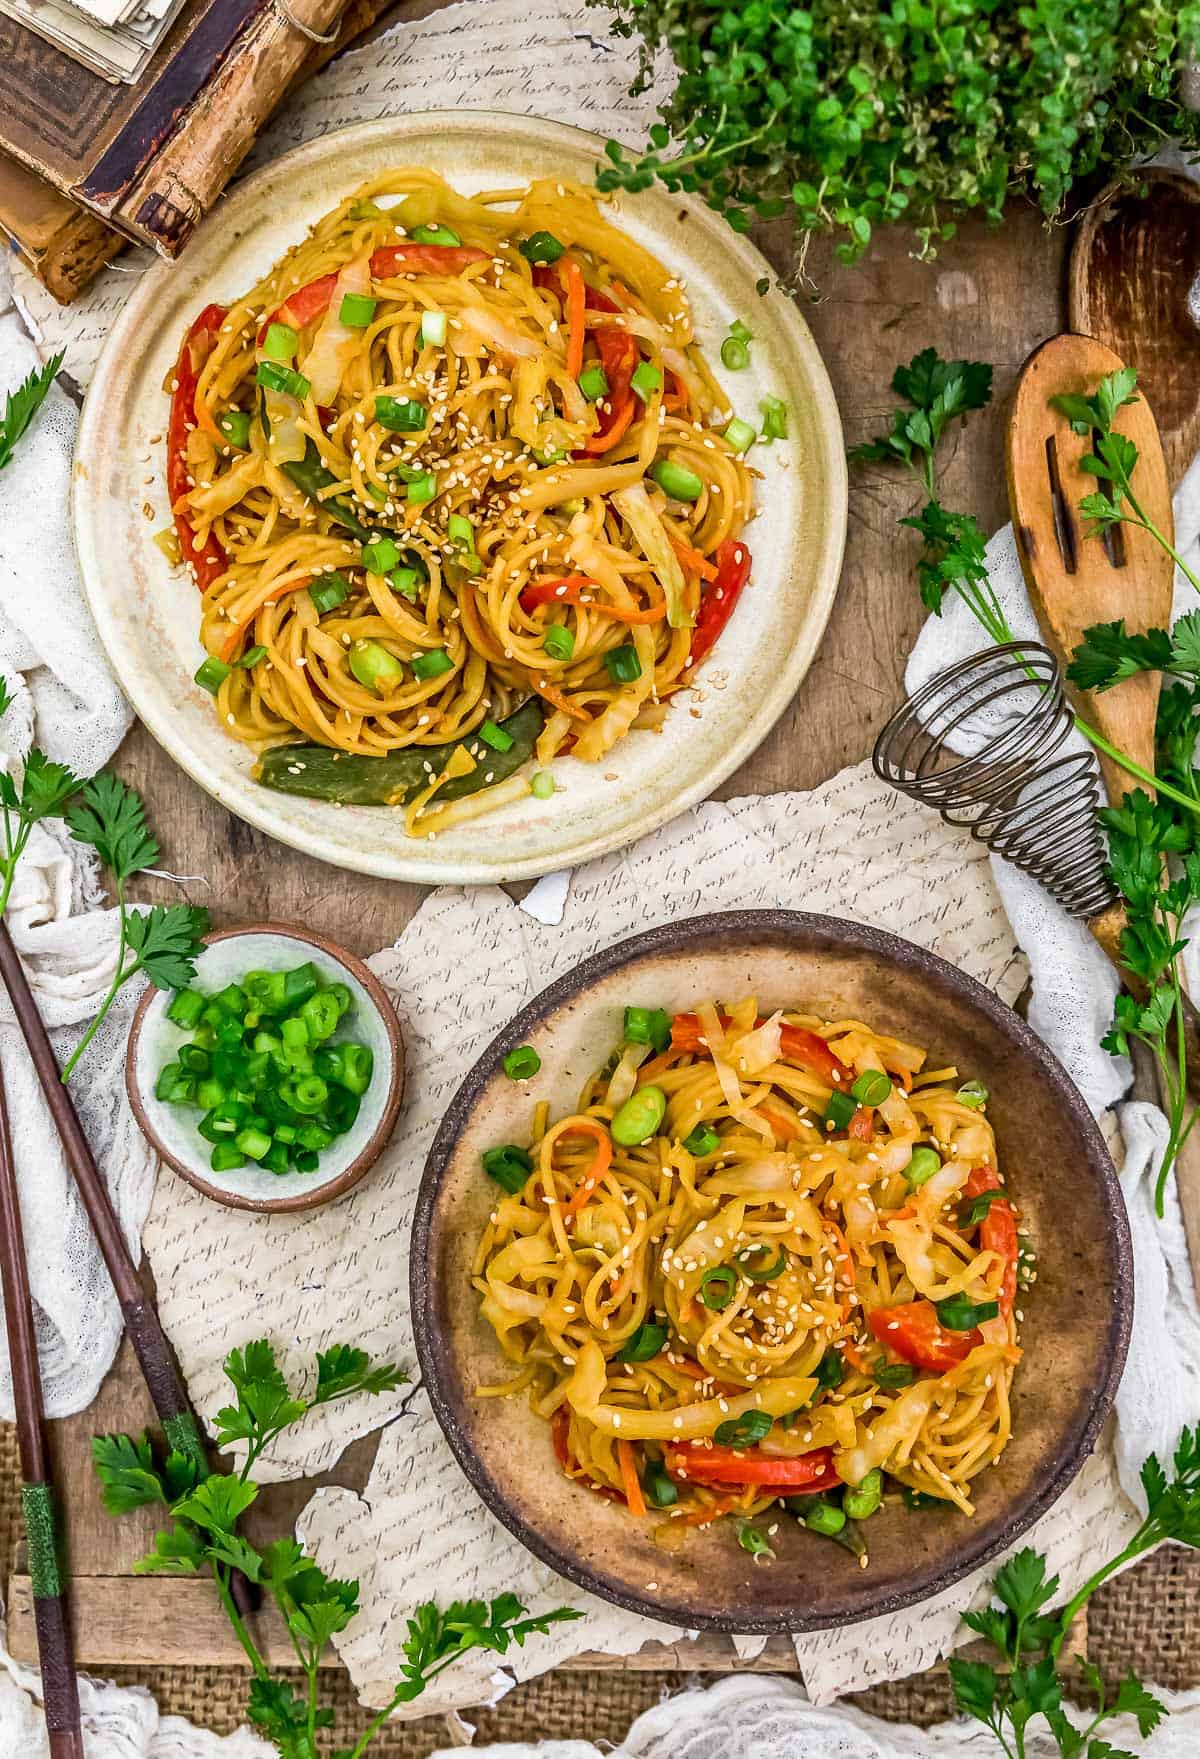 Tablescape of Sweet and Sour Cabbage Noodle Stir Fry